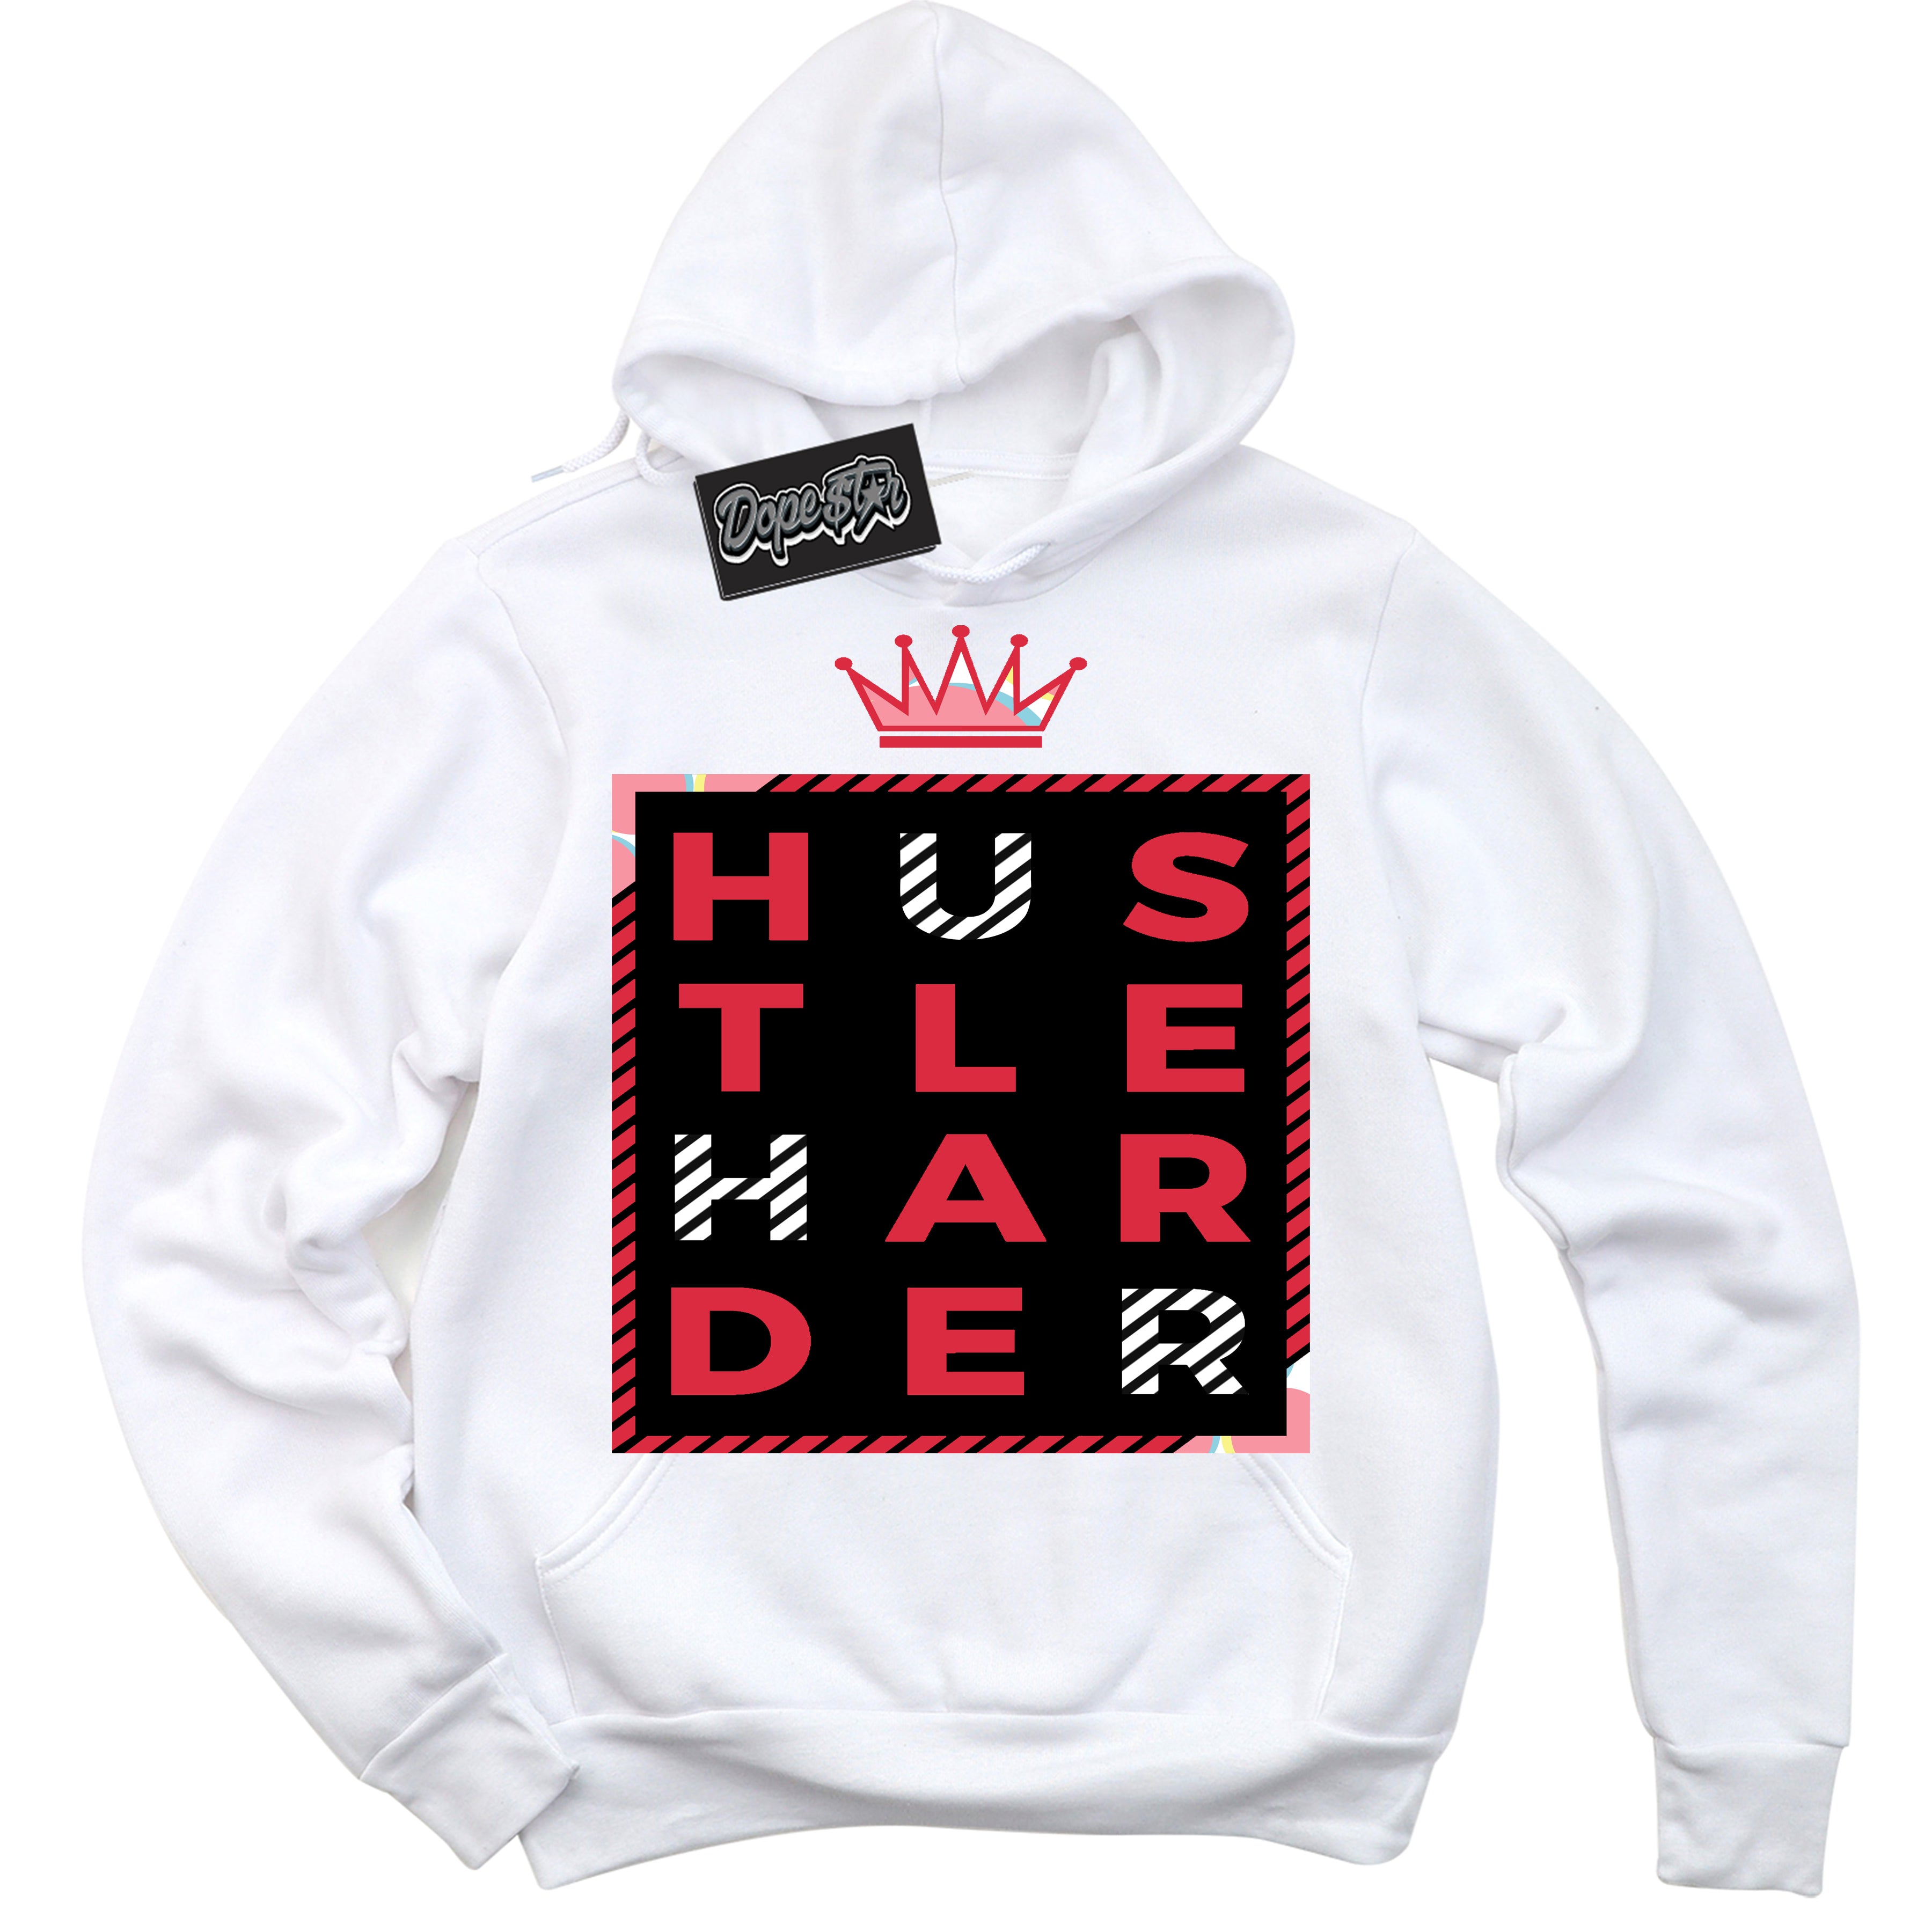 Cool White Graphic DopeStar Hoodie with “ Hustle Harder “ print, that perfectly matches Spider-Verse 1s sneakers